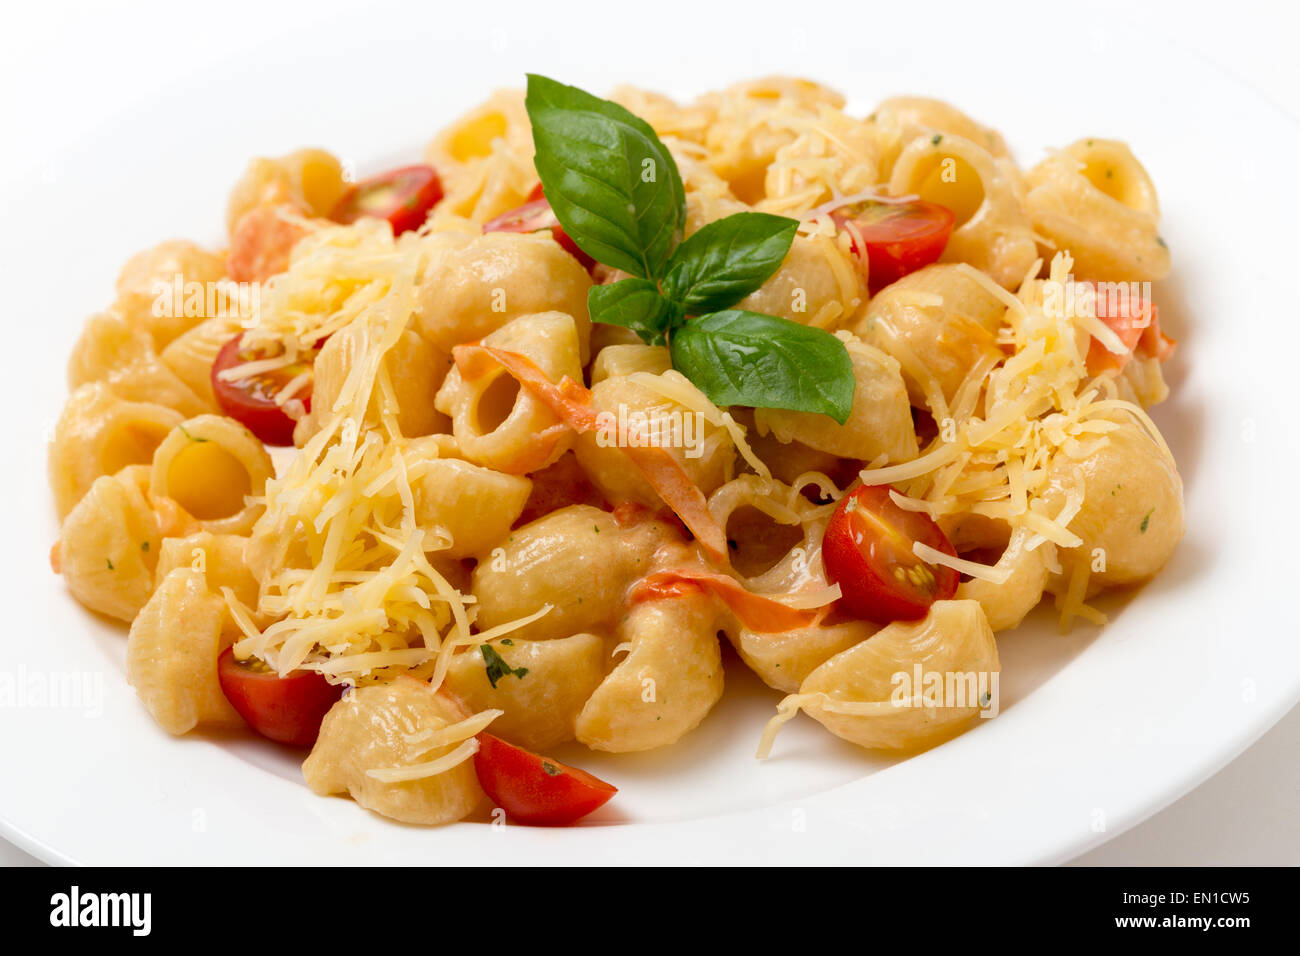 Gomiti rigata 'elbow' pasta tossed with tomatoes cooked in cream and with green pesto, cherry tomatoes and grated parmesan. Stock Photo